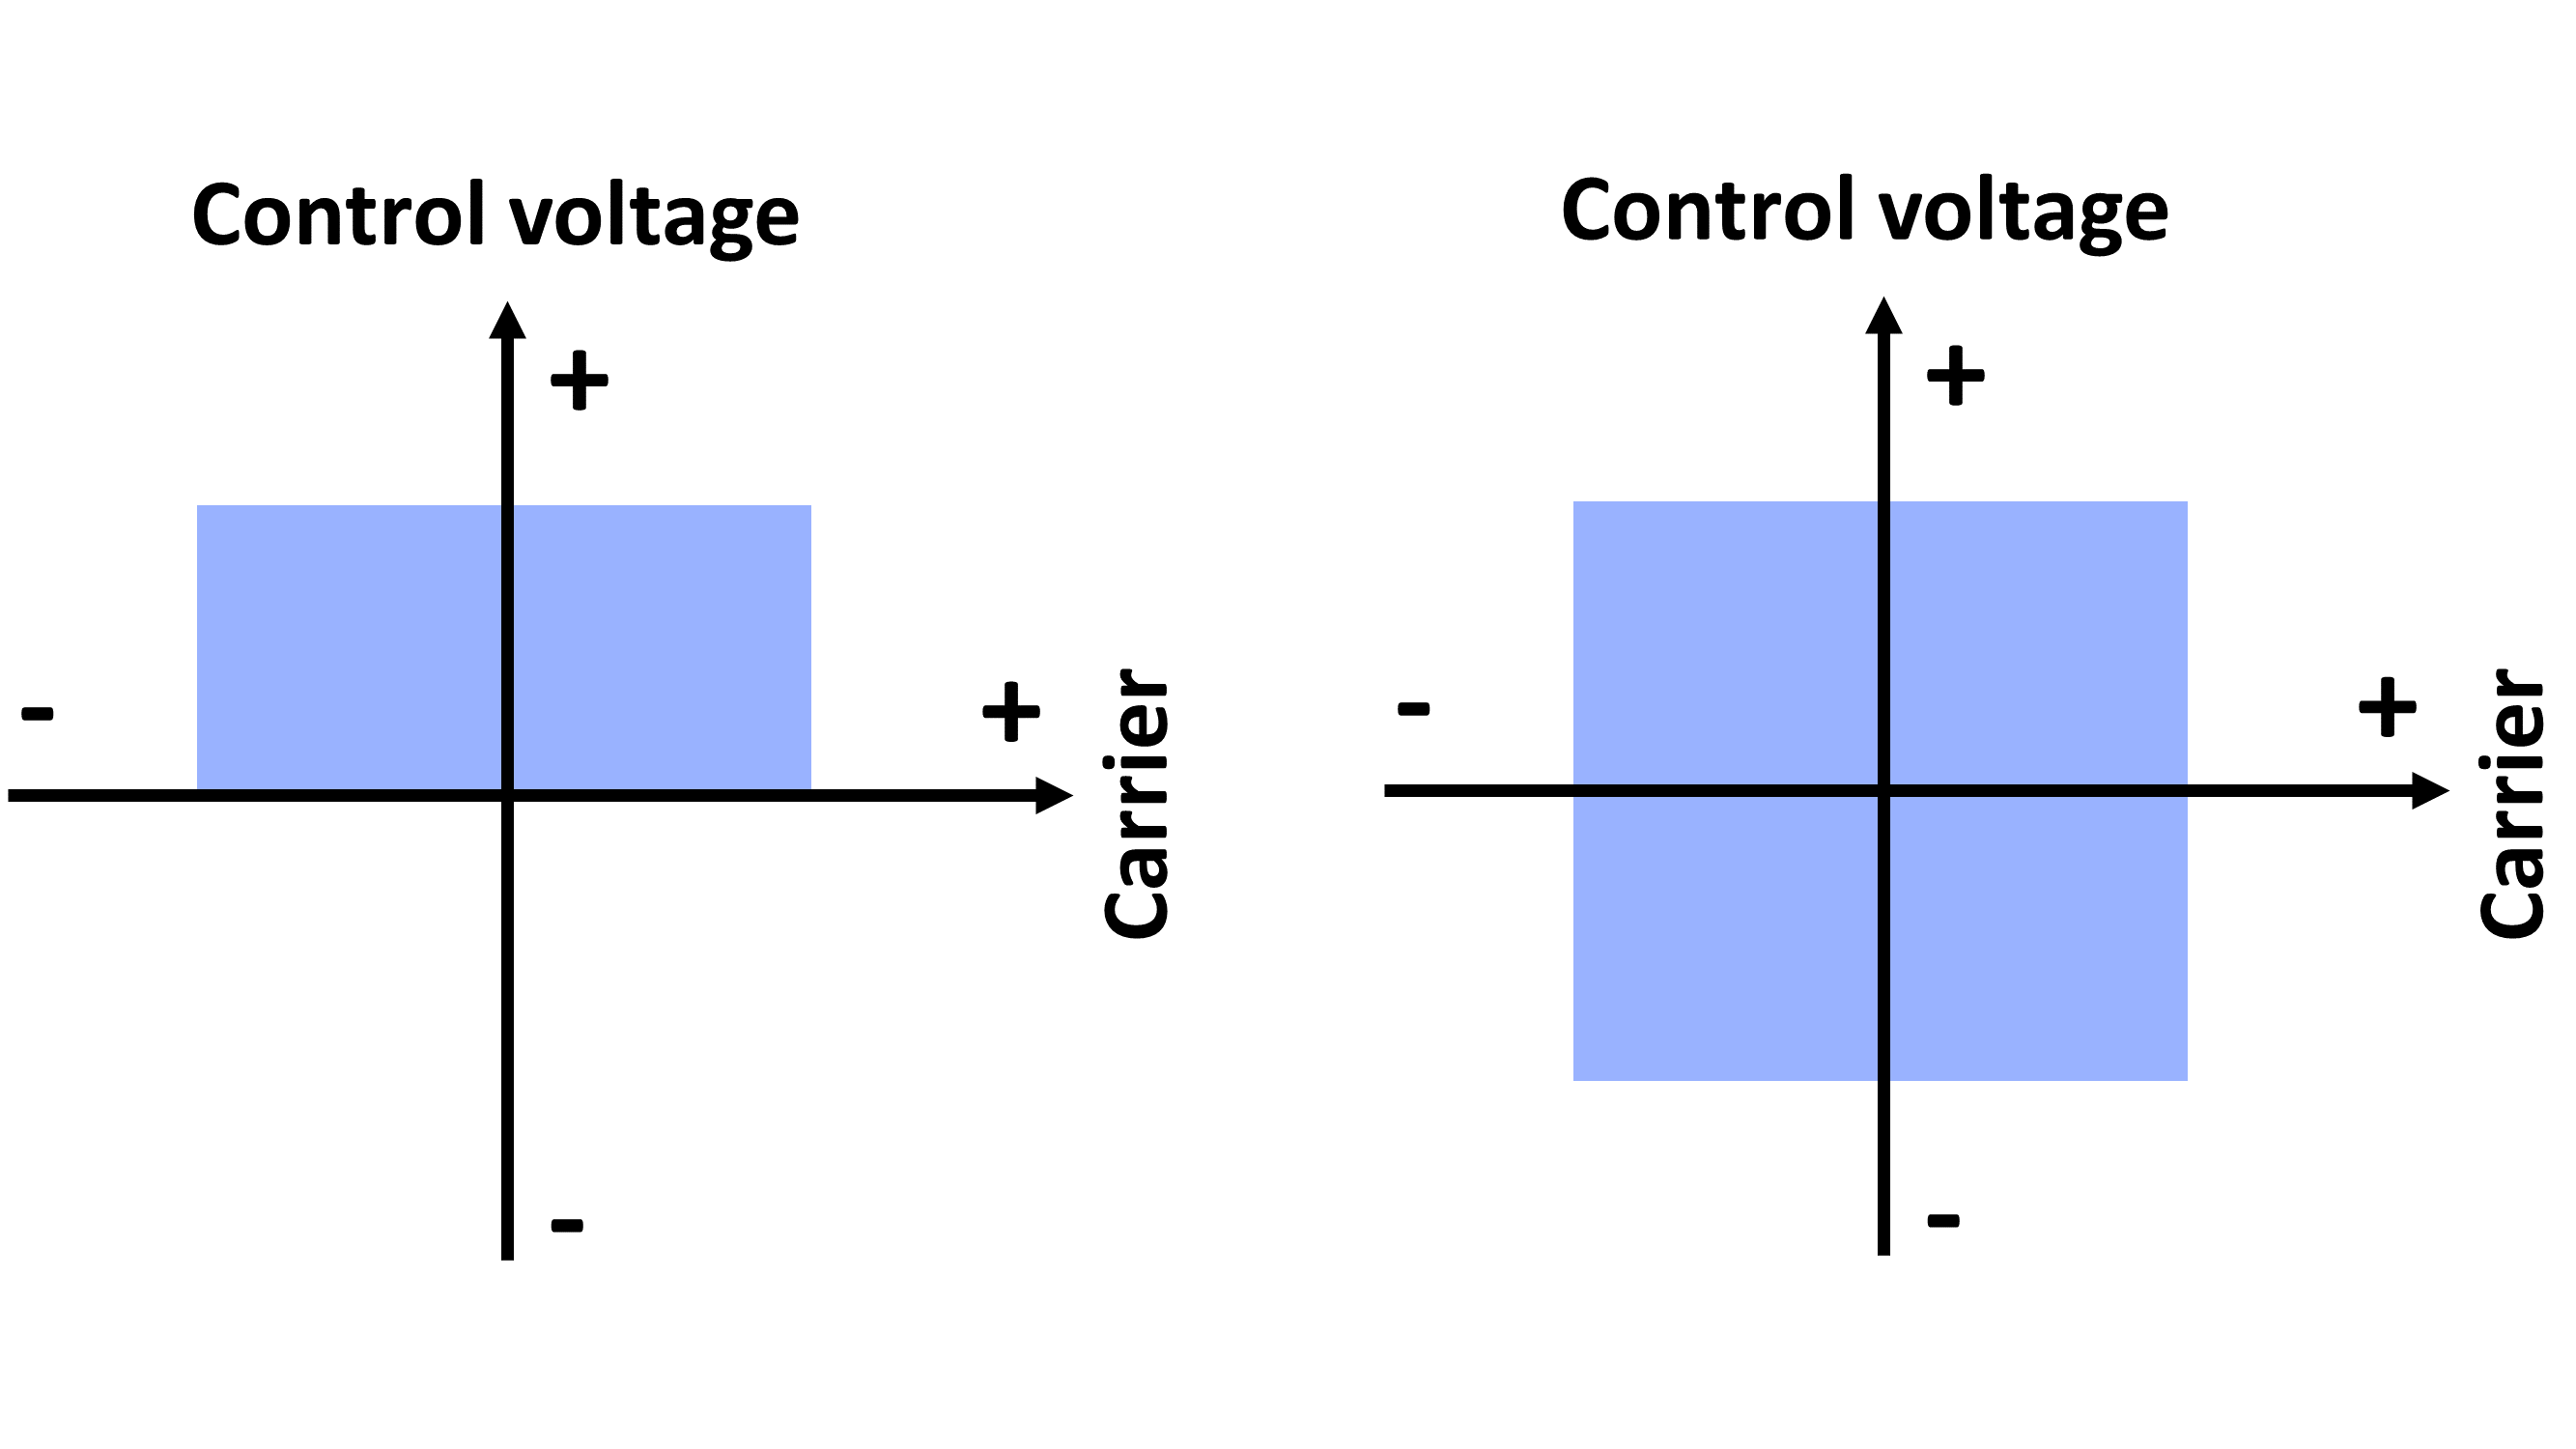 A two-quadrant multiplier multiplies a bipolar signal (carrier) and a unipolar signal (control voltage), so has output in two quadrants (left). A four-quadrant multiplier multiplies two bipolar signals, so has output in all four quadrants (right).